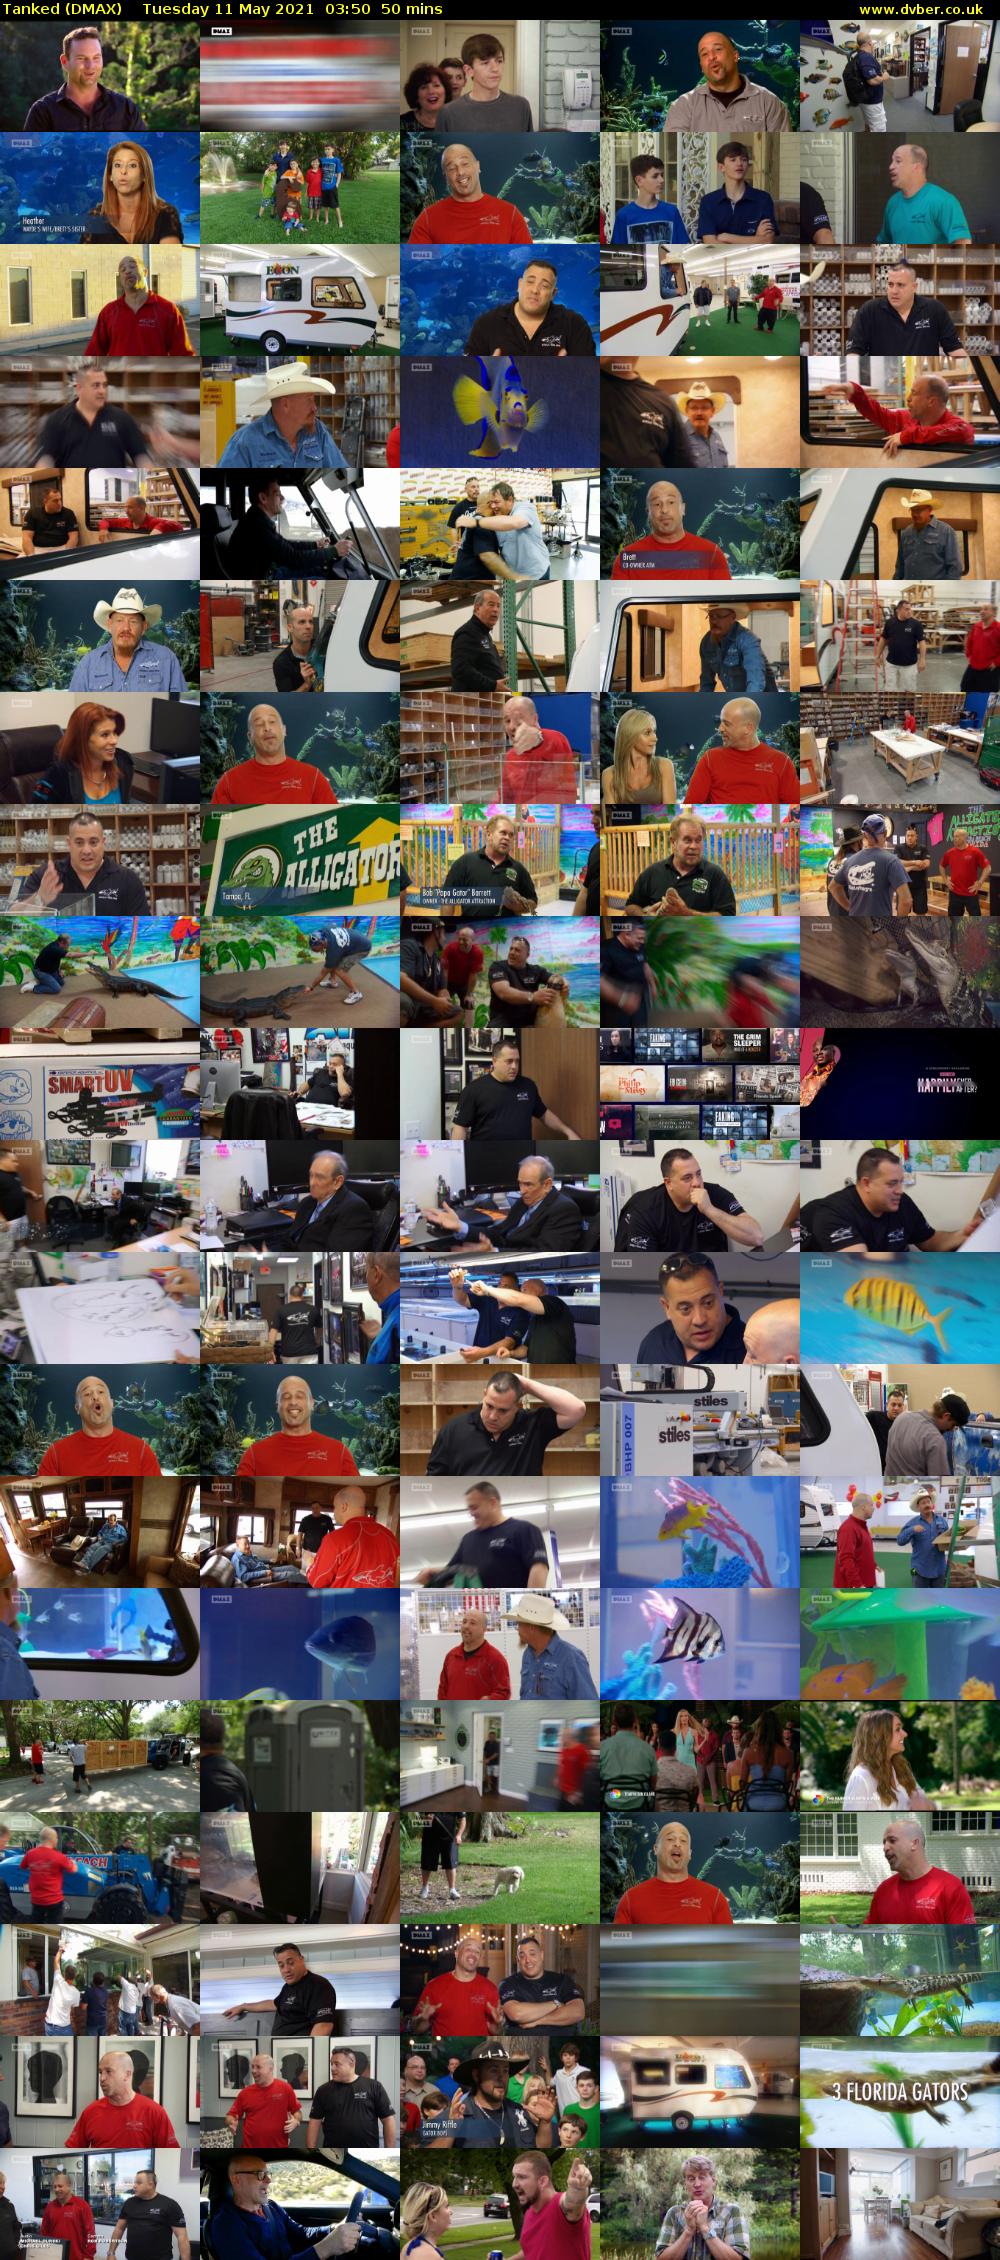 Tanked (DMAX) Tuesday 11 May 2021 03:50 - 04:40